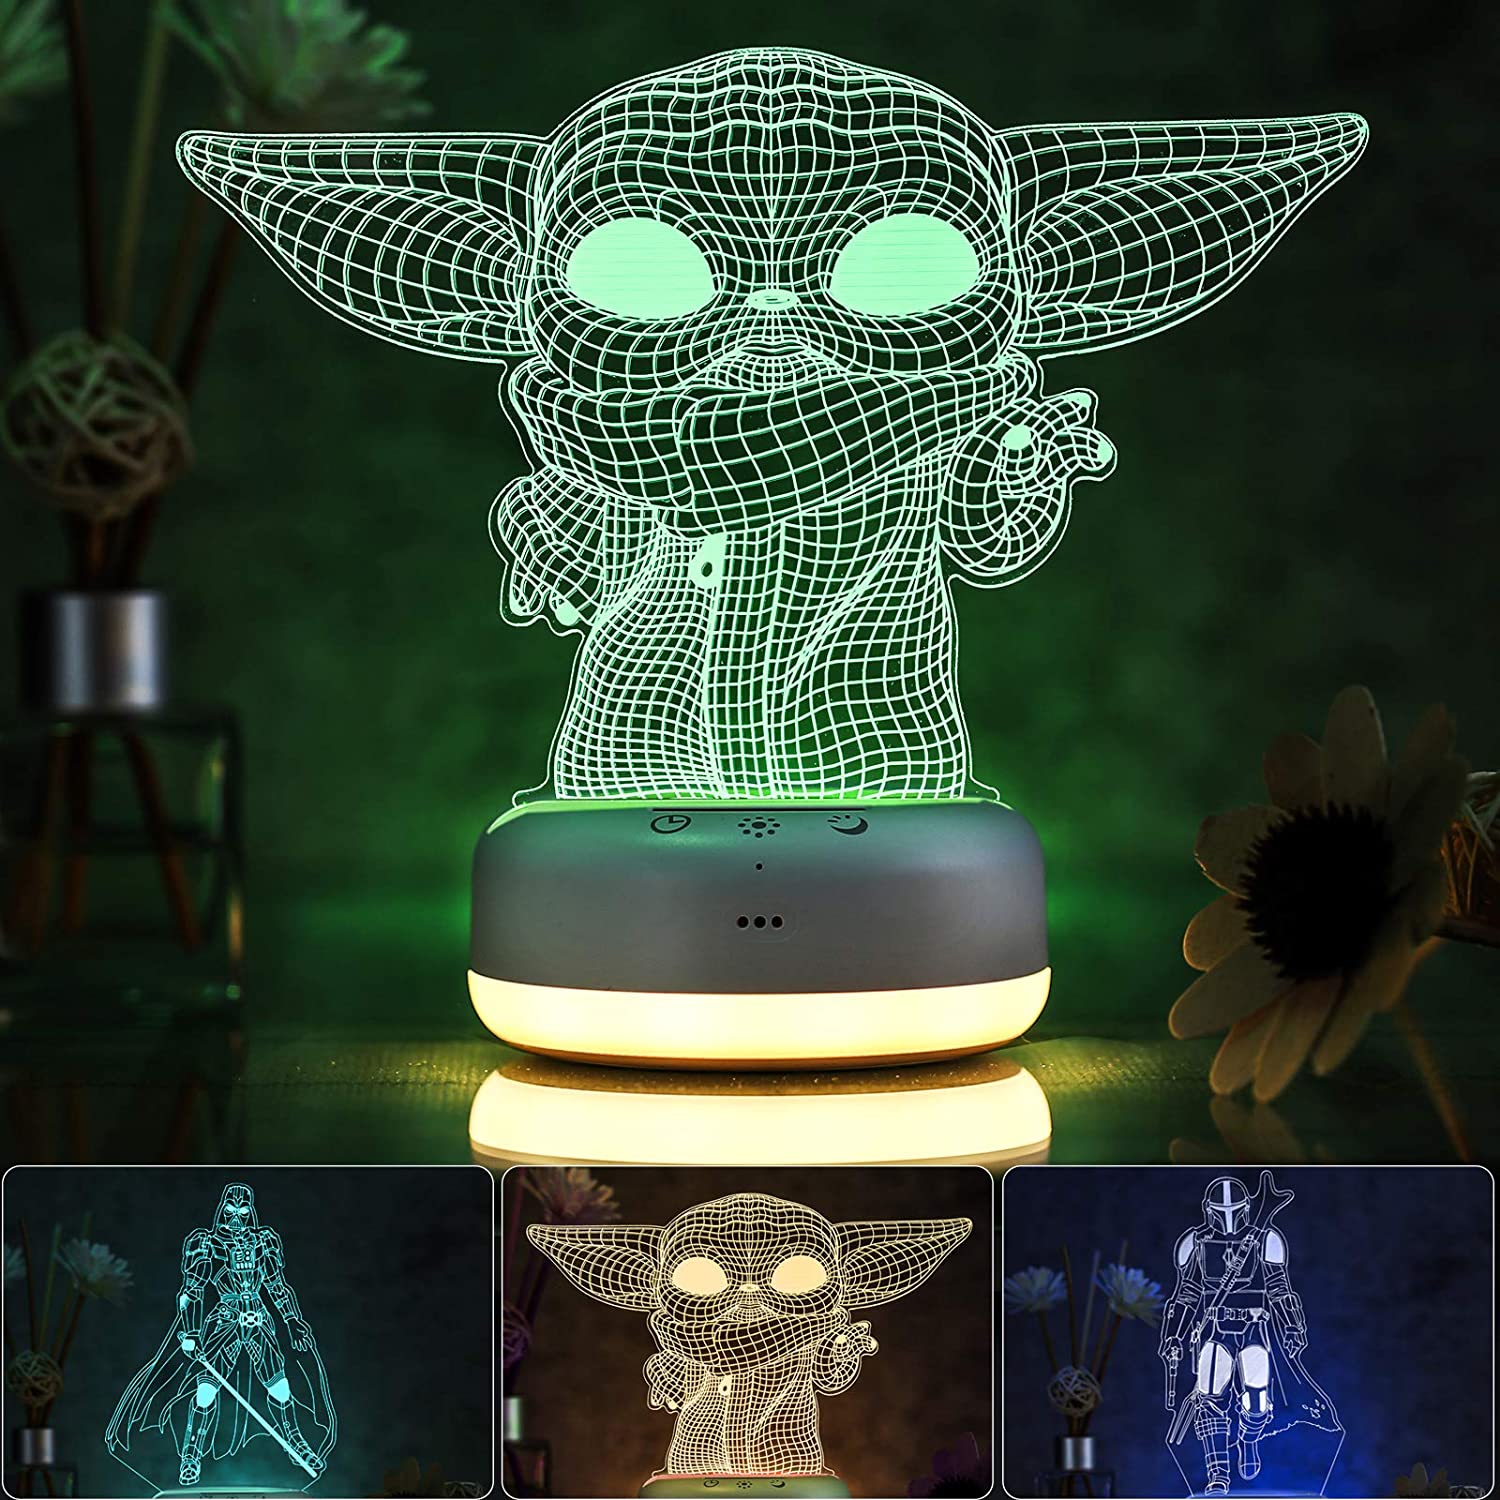 3D Star Wars Night Light for Kids - 3 Patterns & 16 Color Change Decor Lamp with Timer, Remote Control & Touch - Baby Yoda Toys for Boys, Girls- Birthday & Christmas Gifts for Kids and Star Wars Fans